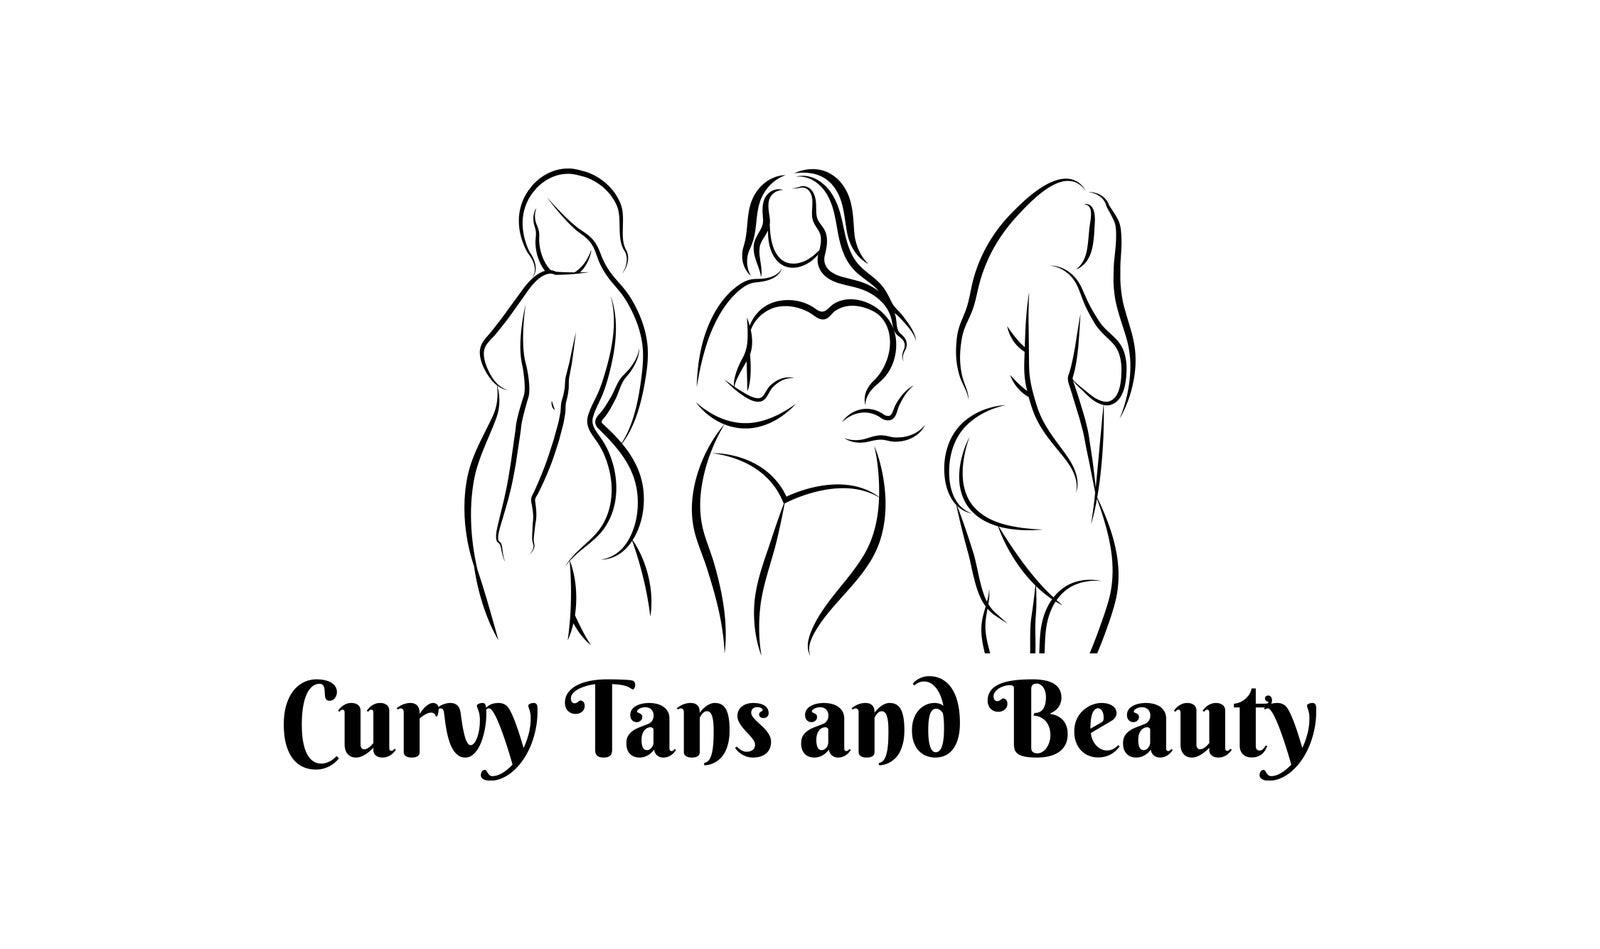 Curvy Tans and Beauty